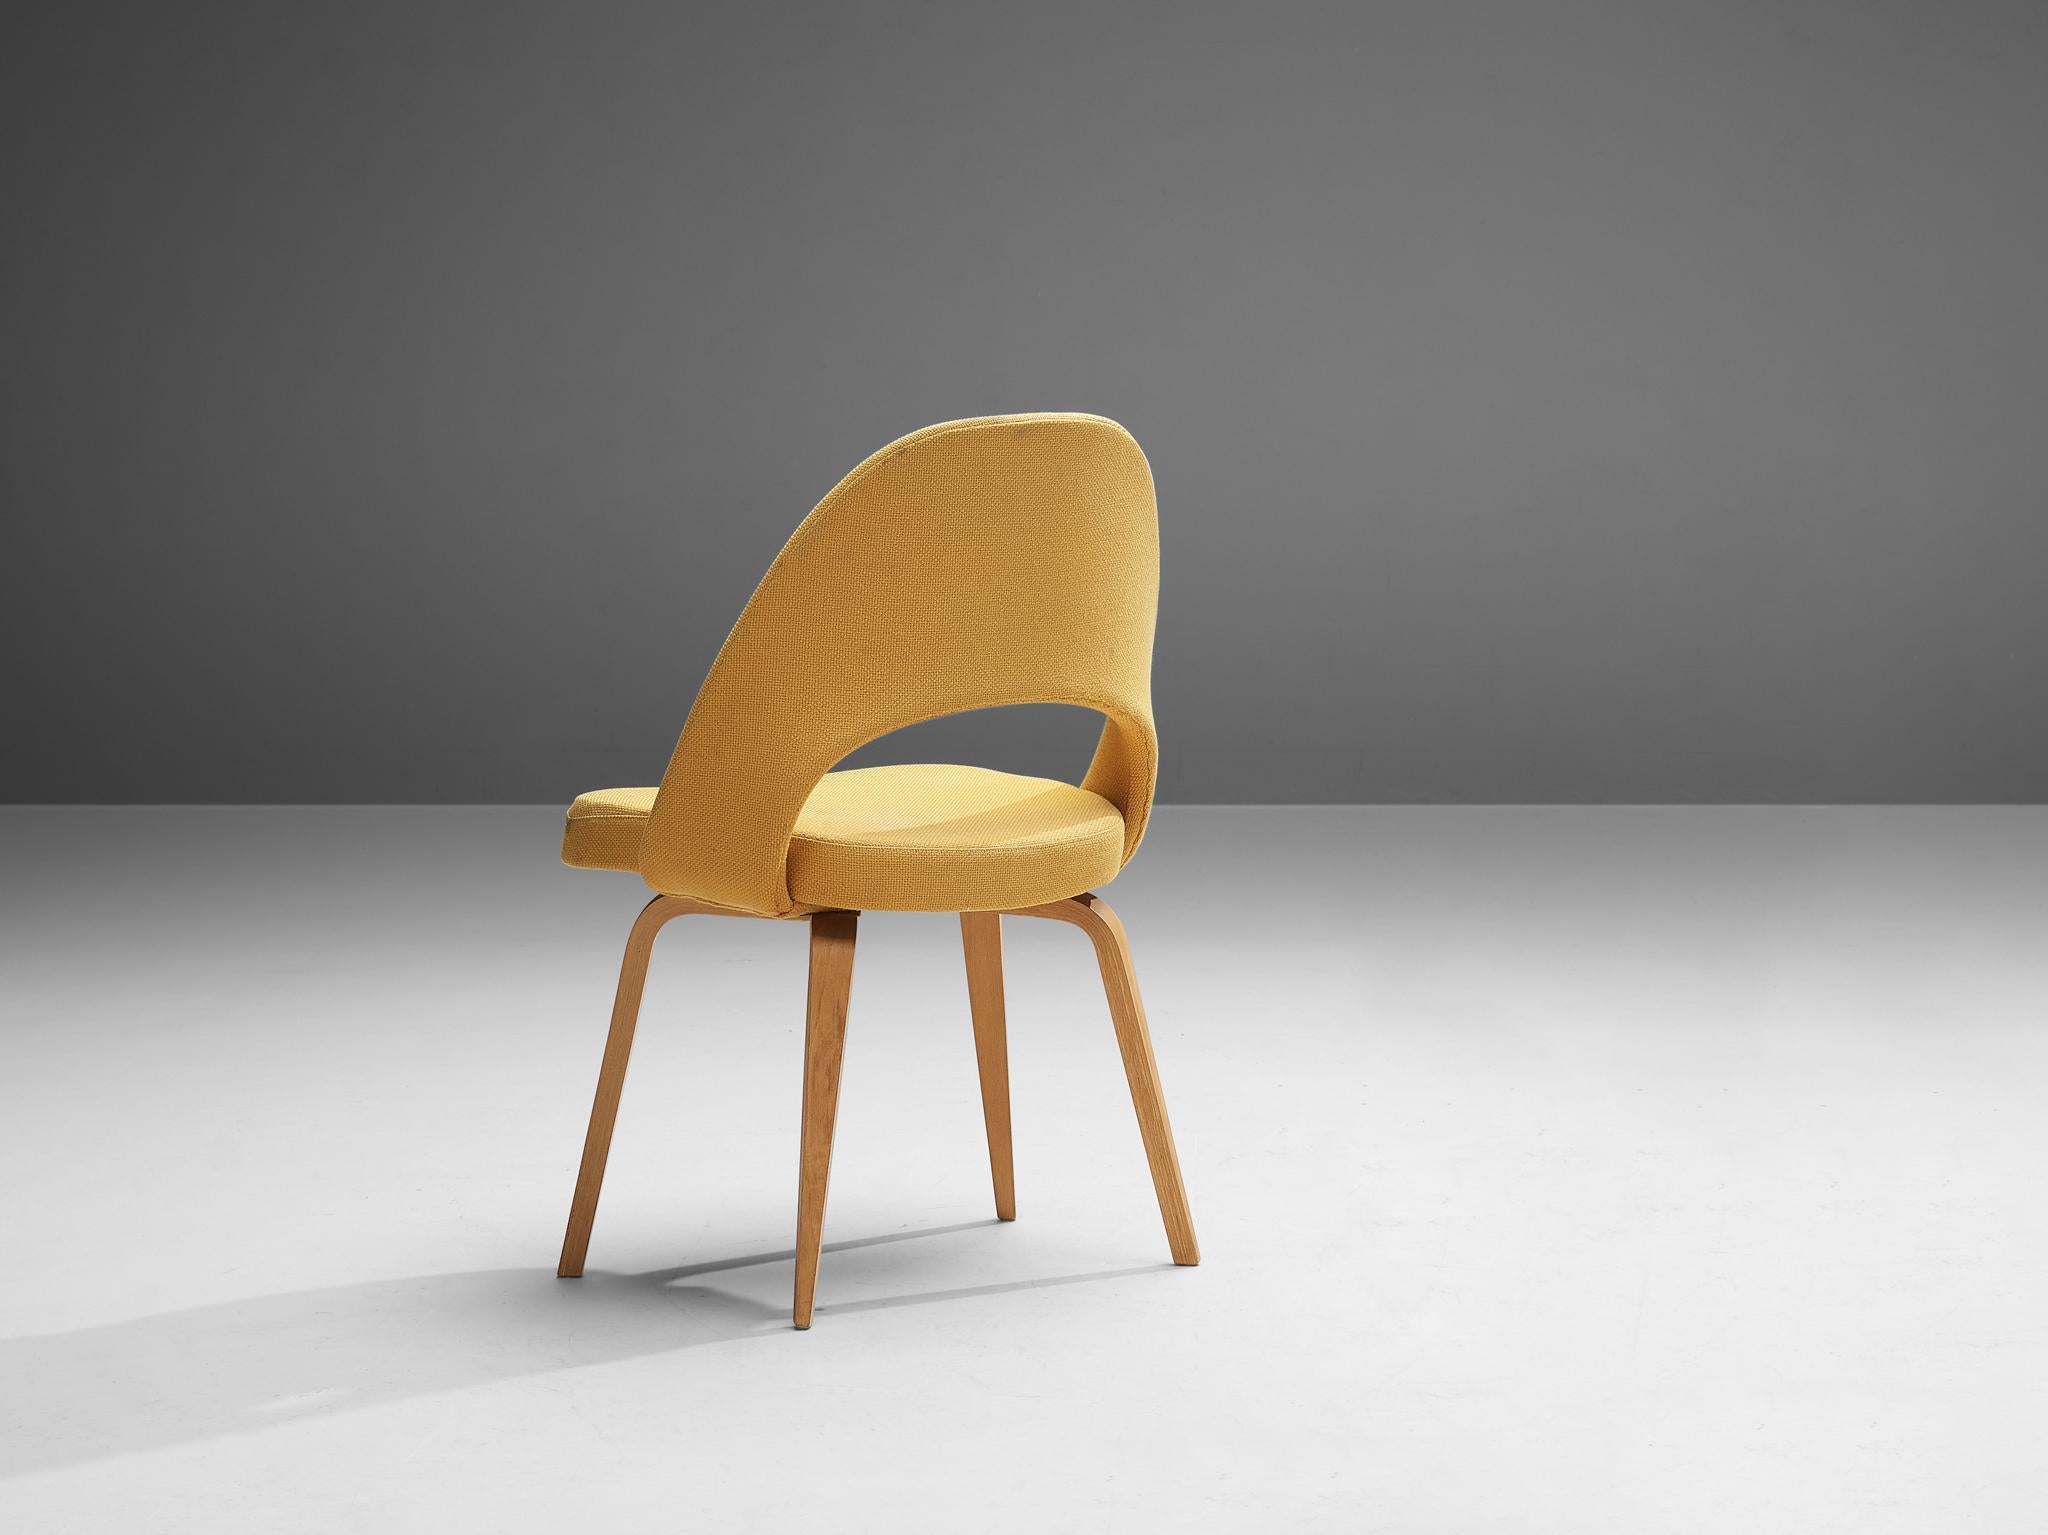 Eero Saarinen for Knoll International, dining chair model 72, wood, fabric, United States 1948. 

An organic shaped chair designed by Eero Saarinen. A fluid, sculptural form. This timeless and versatile design continues to fit seamlessly into